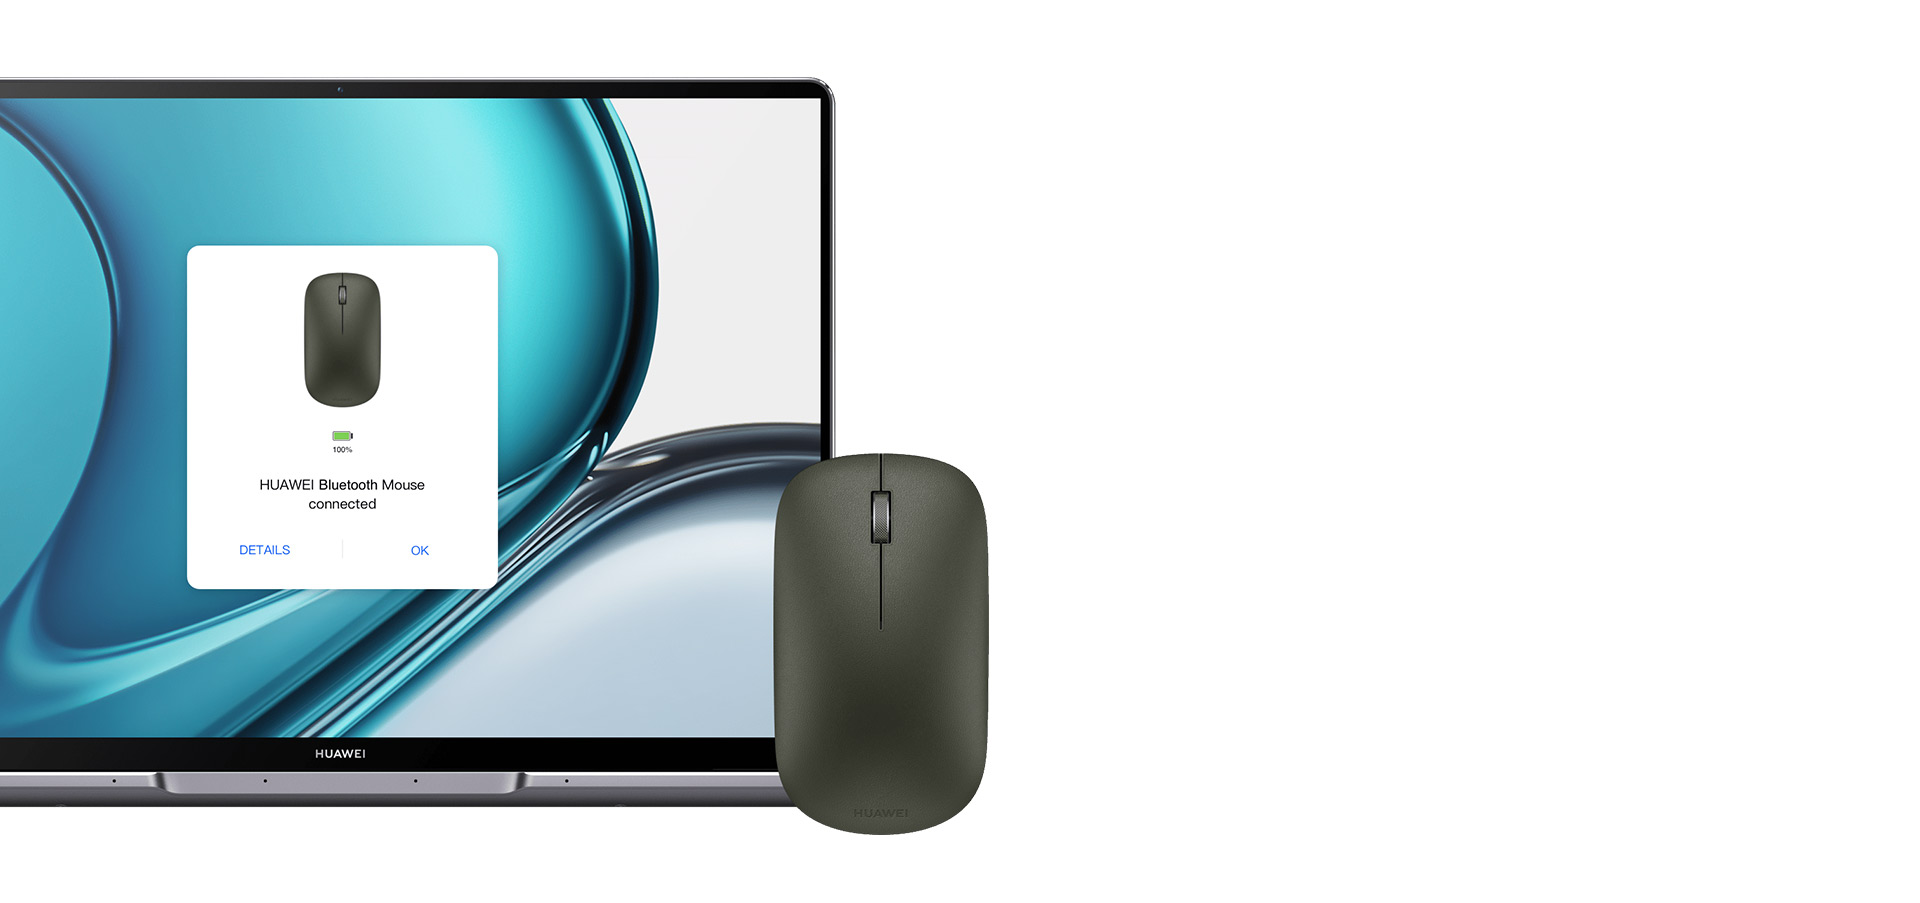 HUAWEI Bluetooth Mouse CD 23